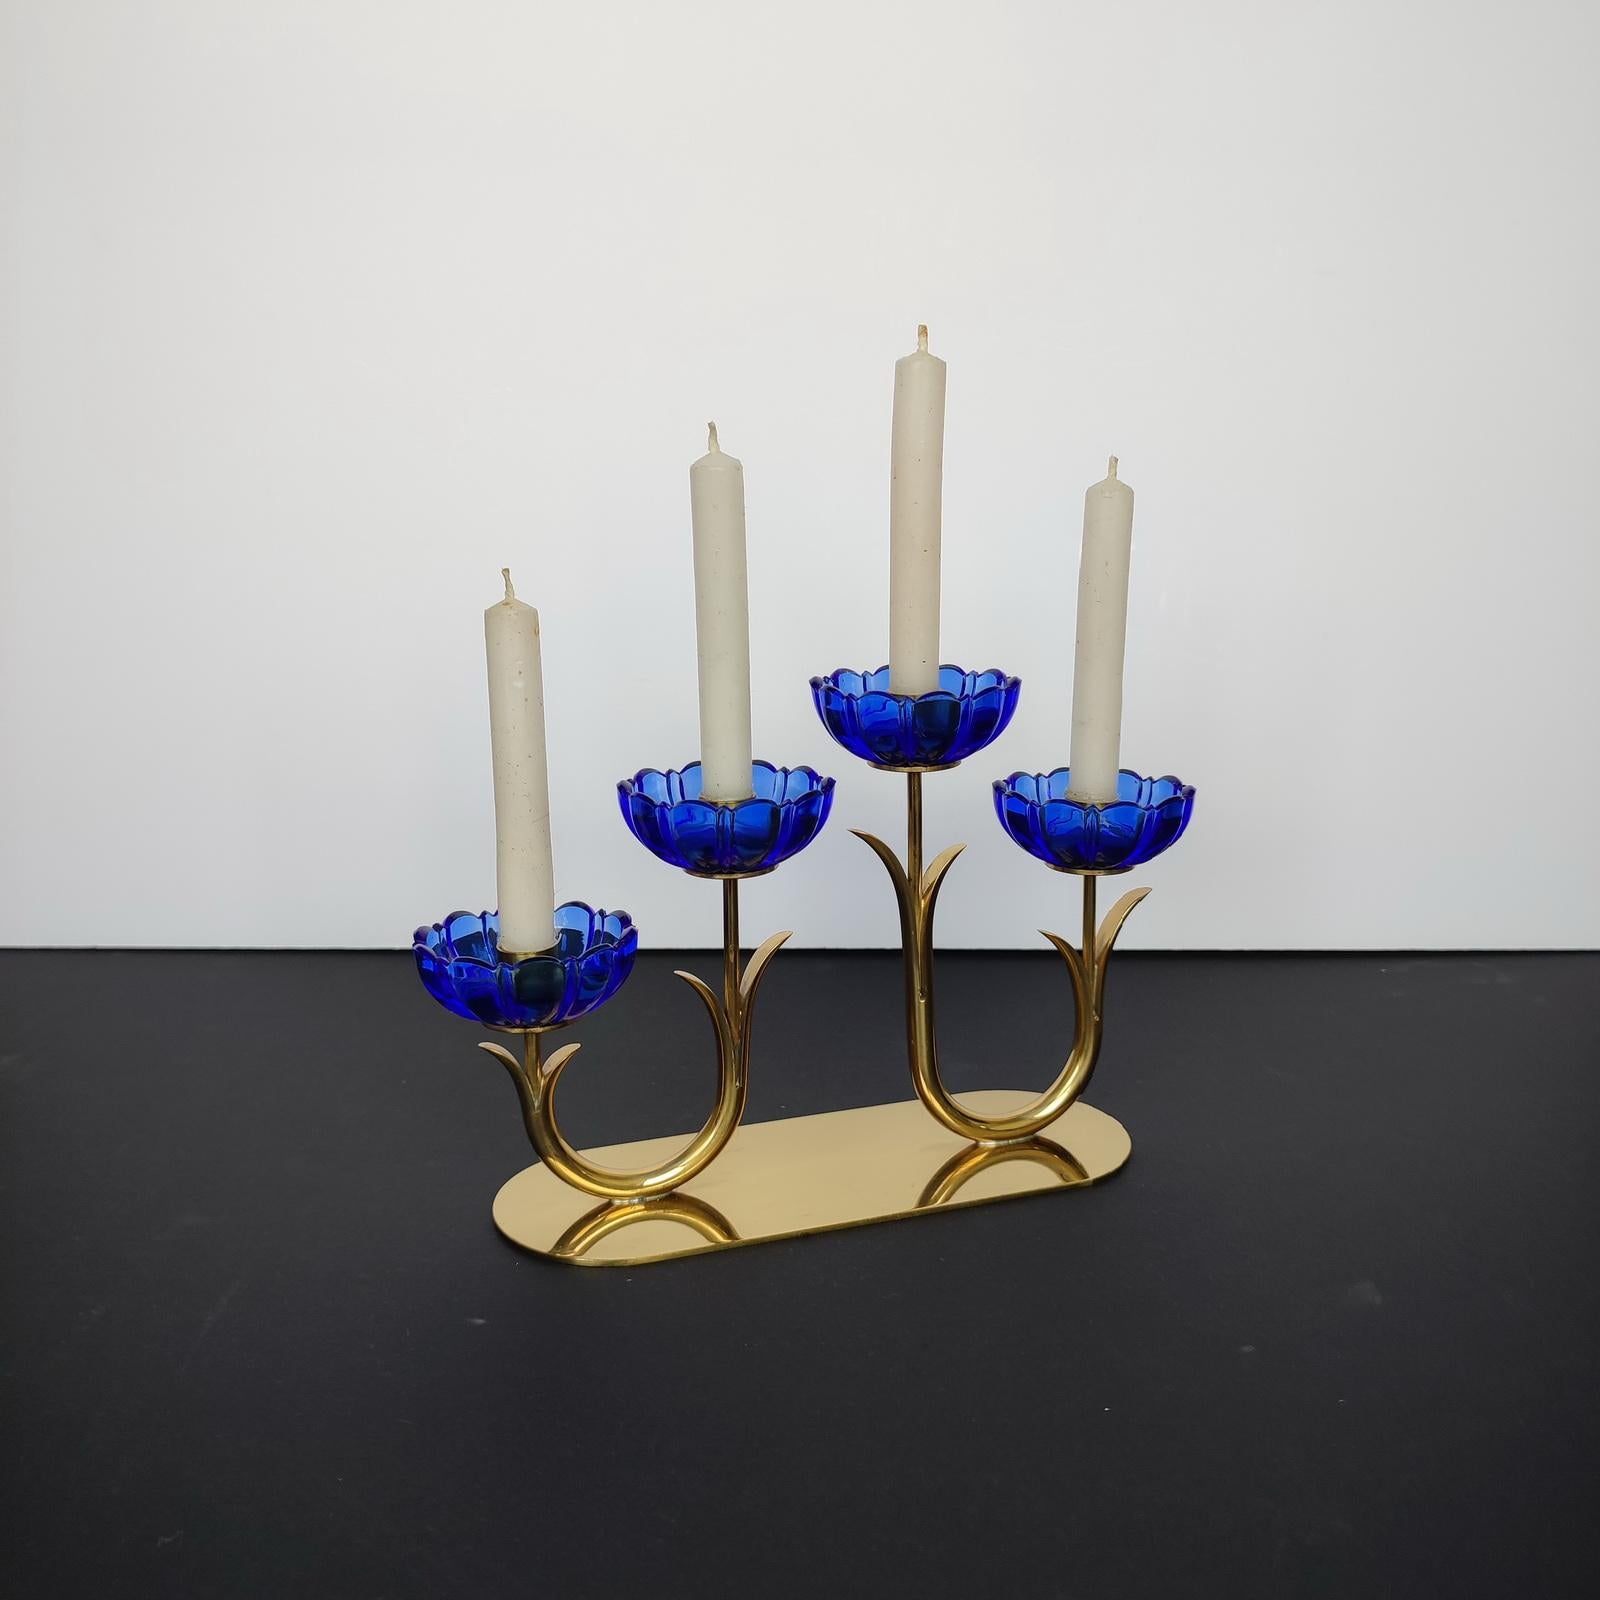 Gunnar Ander for Ystad Metall. Candlestick in brass and blue art glass shaped like flowers. 1950s. Maker's mark underneath. In very good used condition.
Dimensions: 21 x 12.5 x 6.5 cm.
Four lights candlestick, ideal for a Christmas present!.